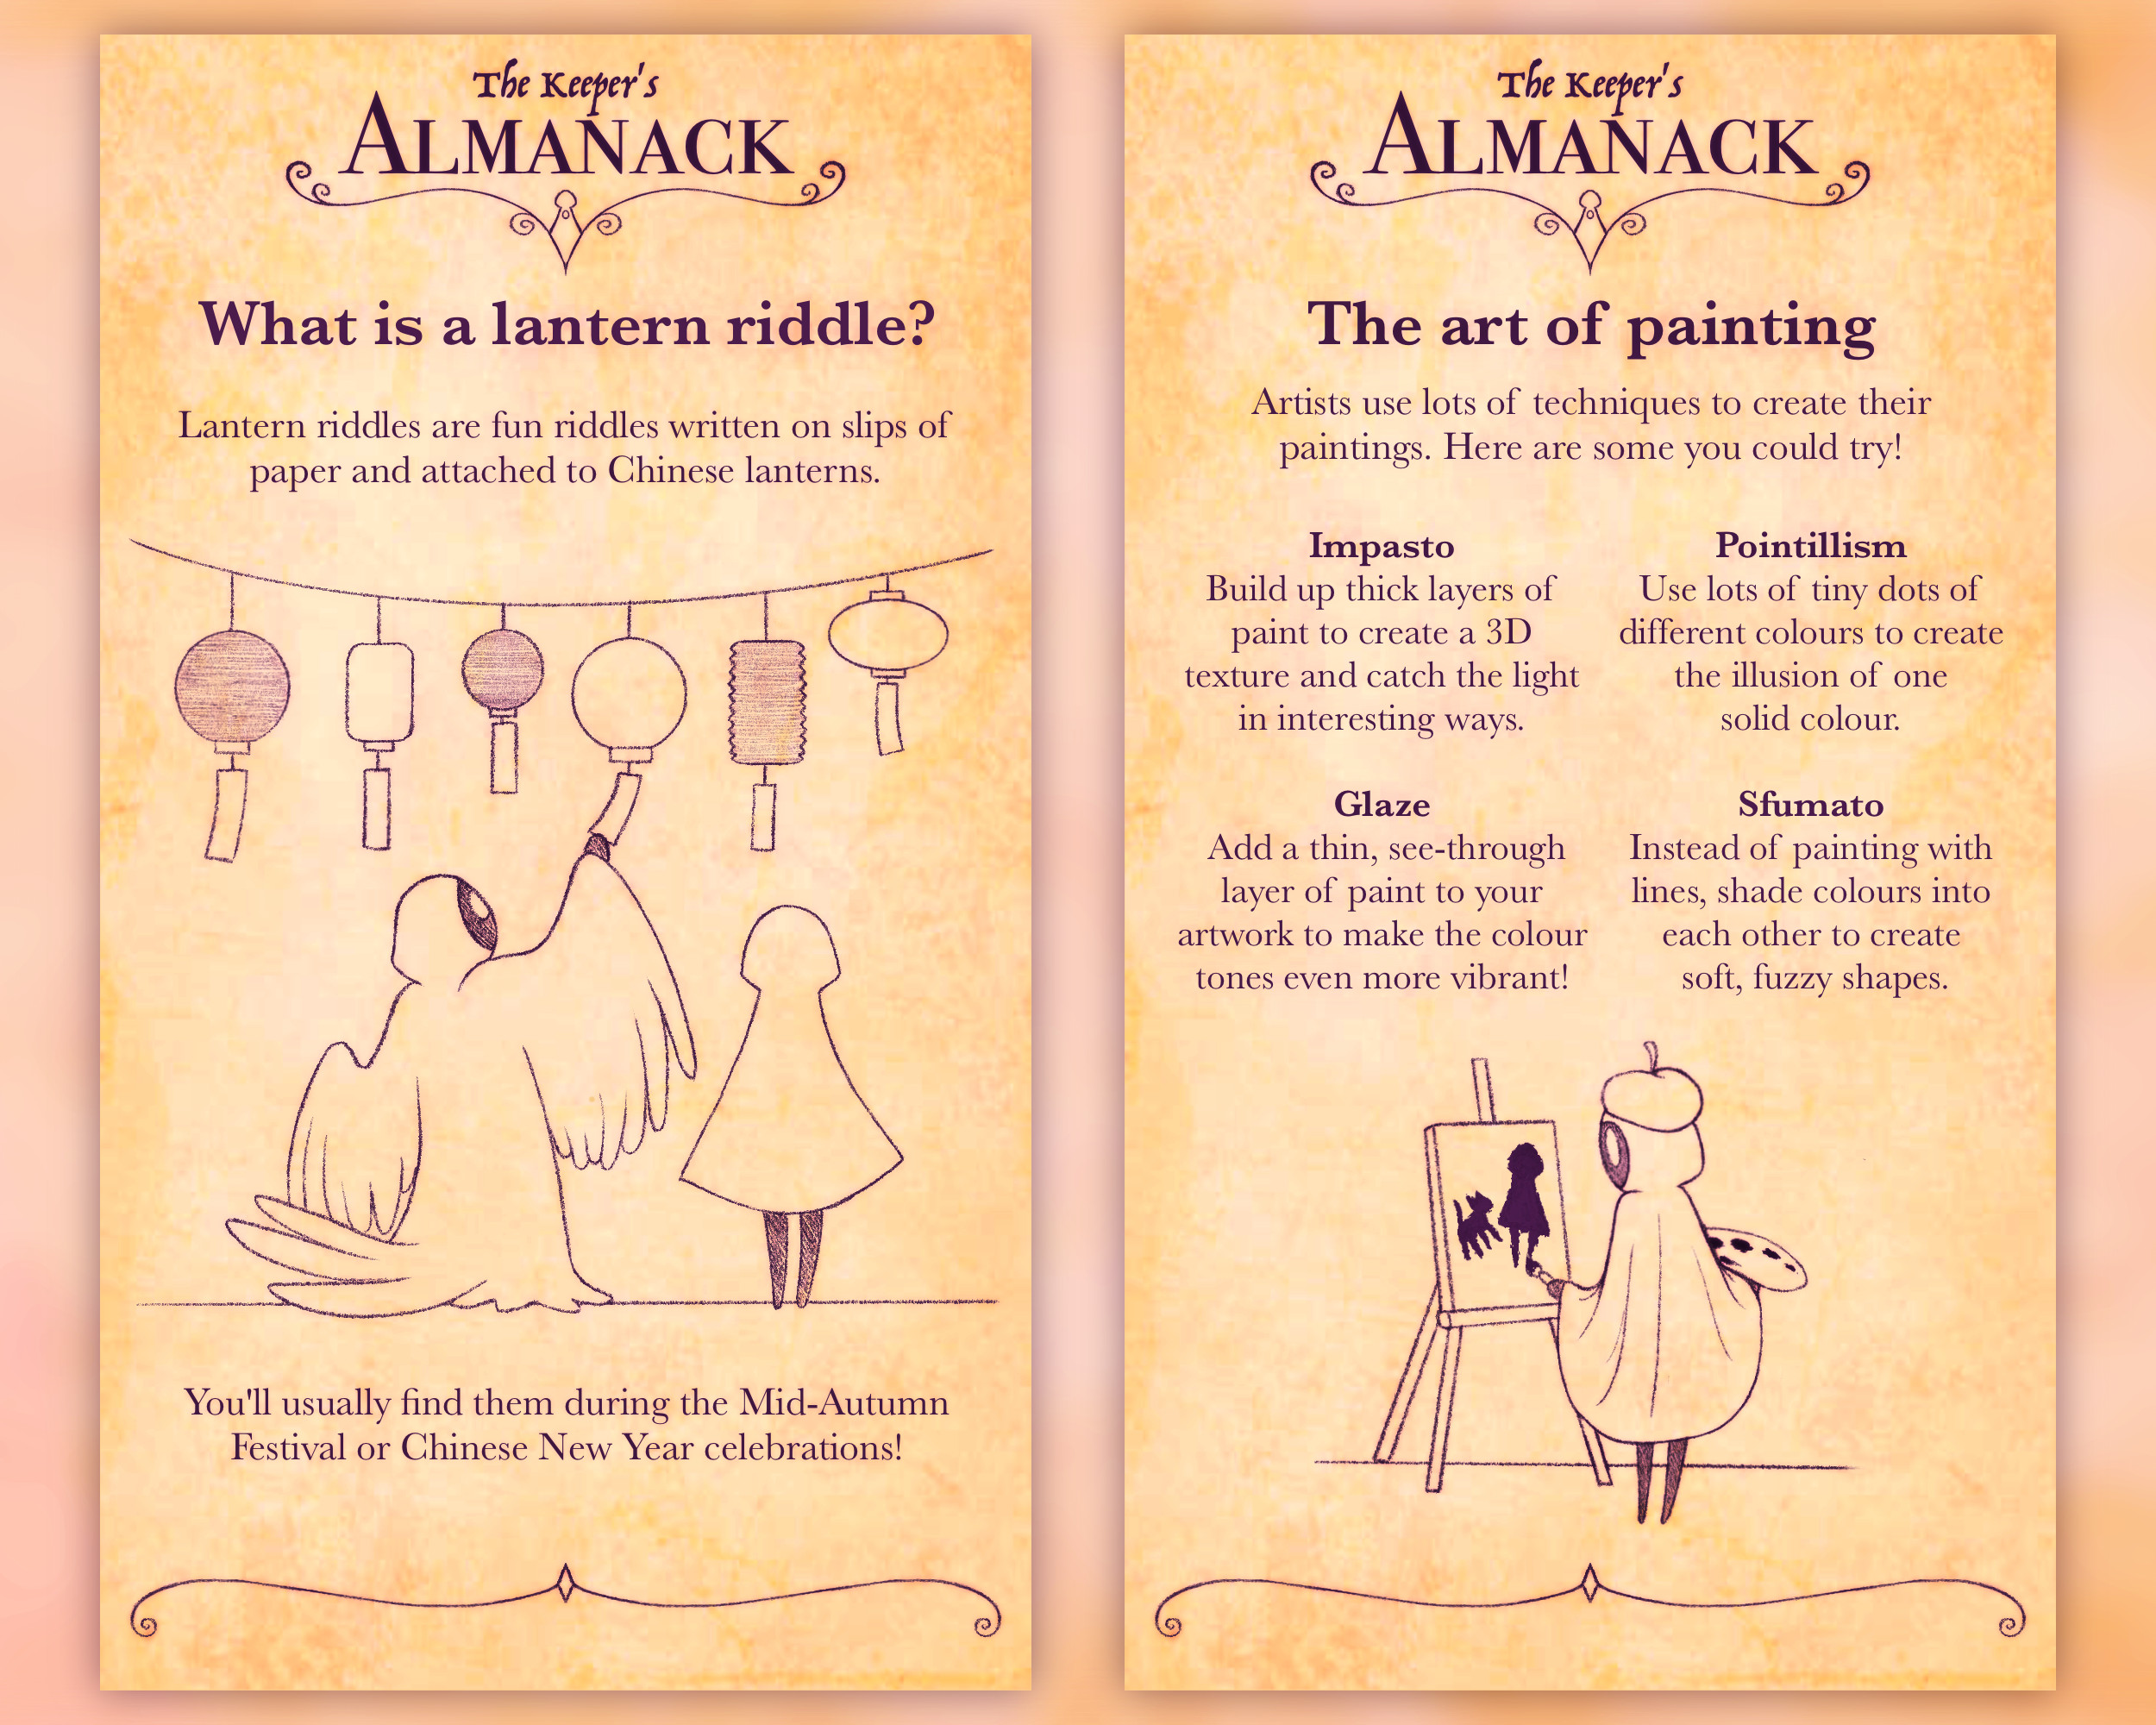 The Keeper's Almanack, page 3 and 4.